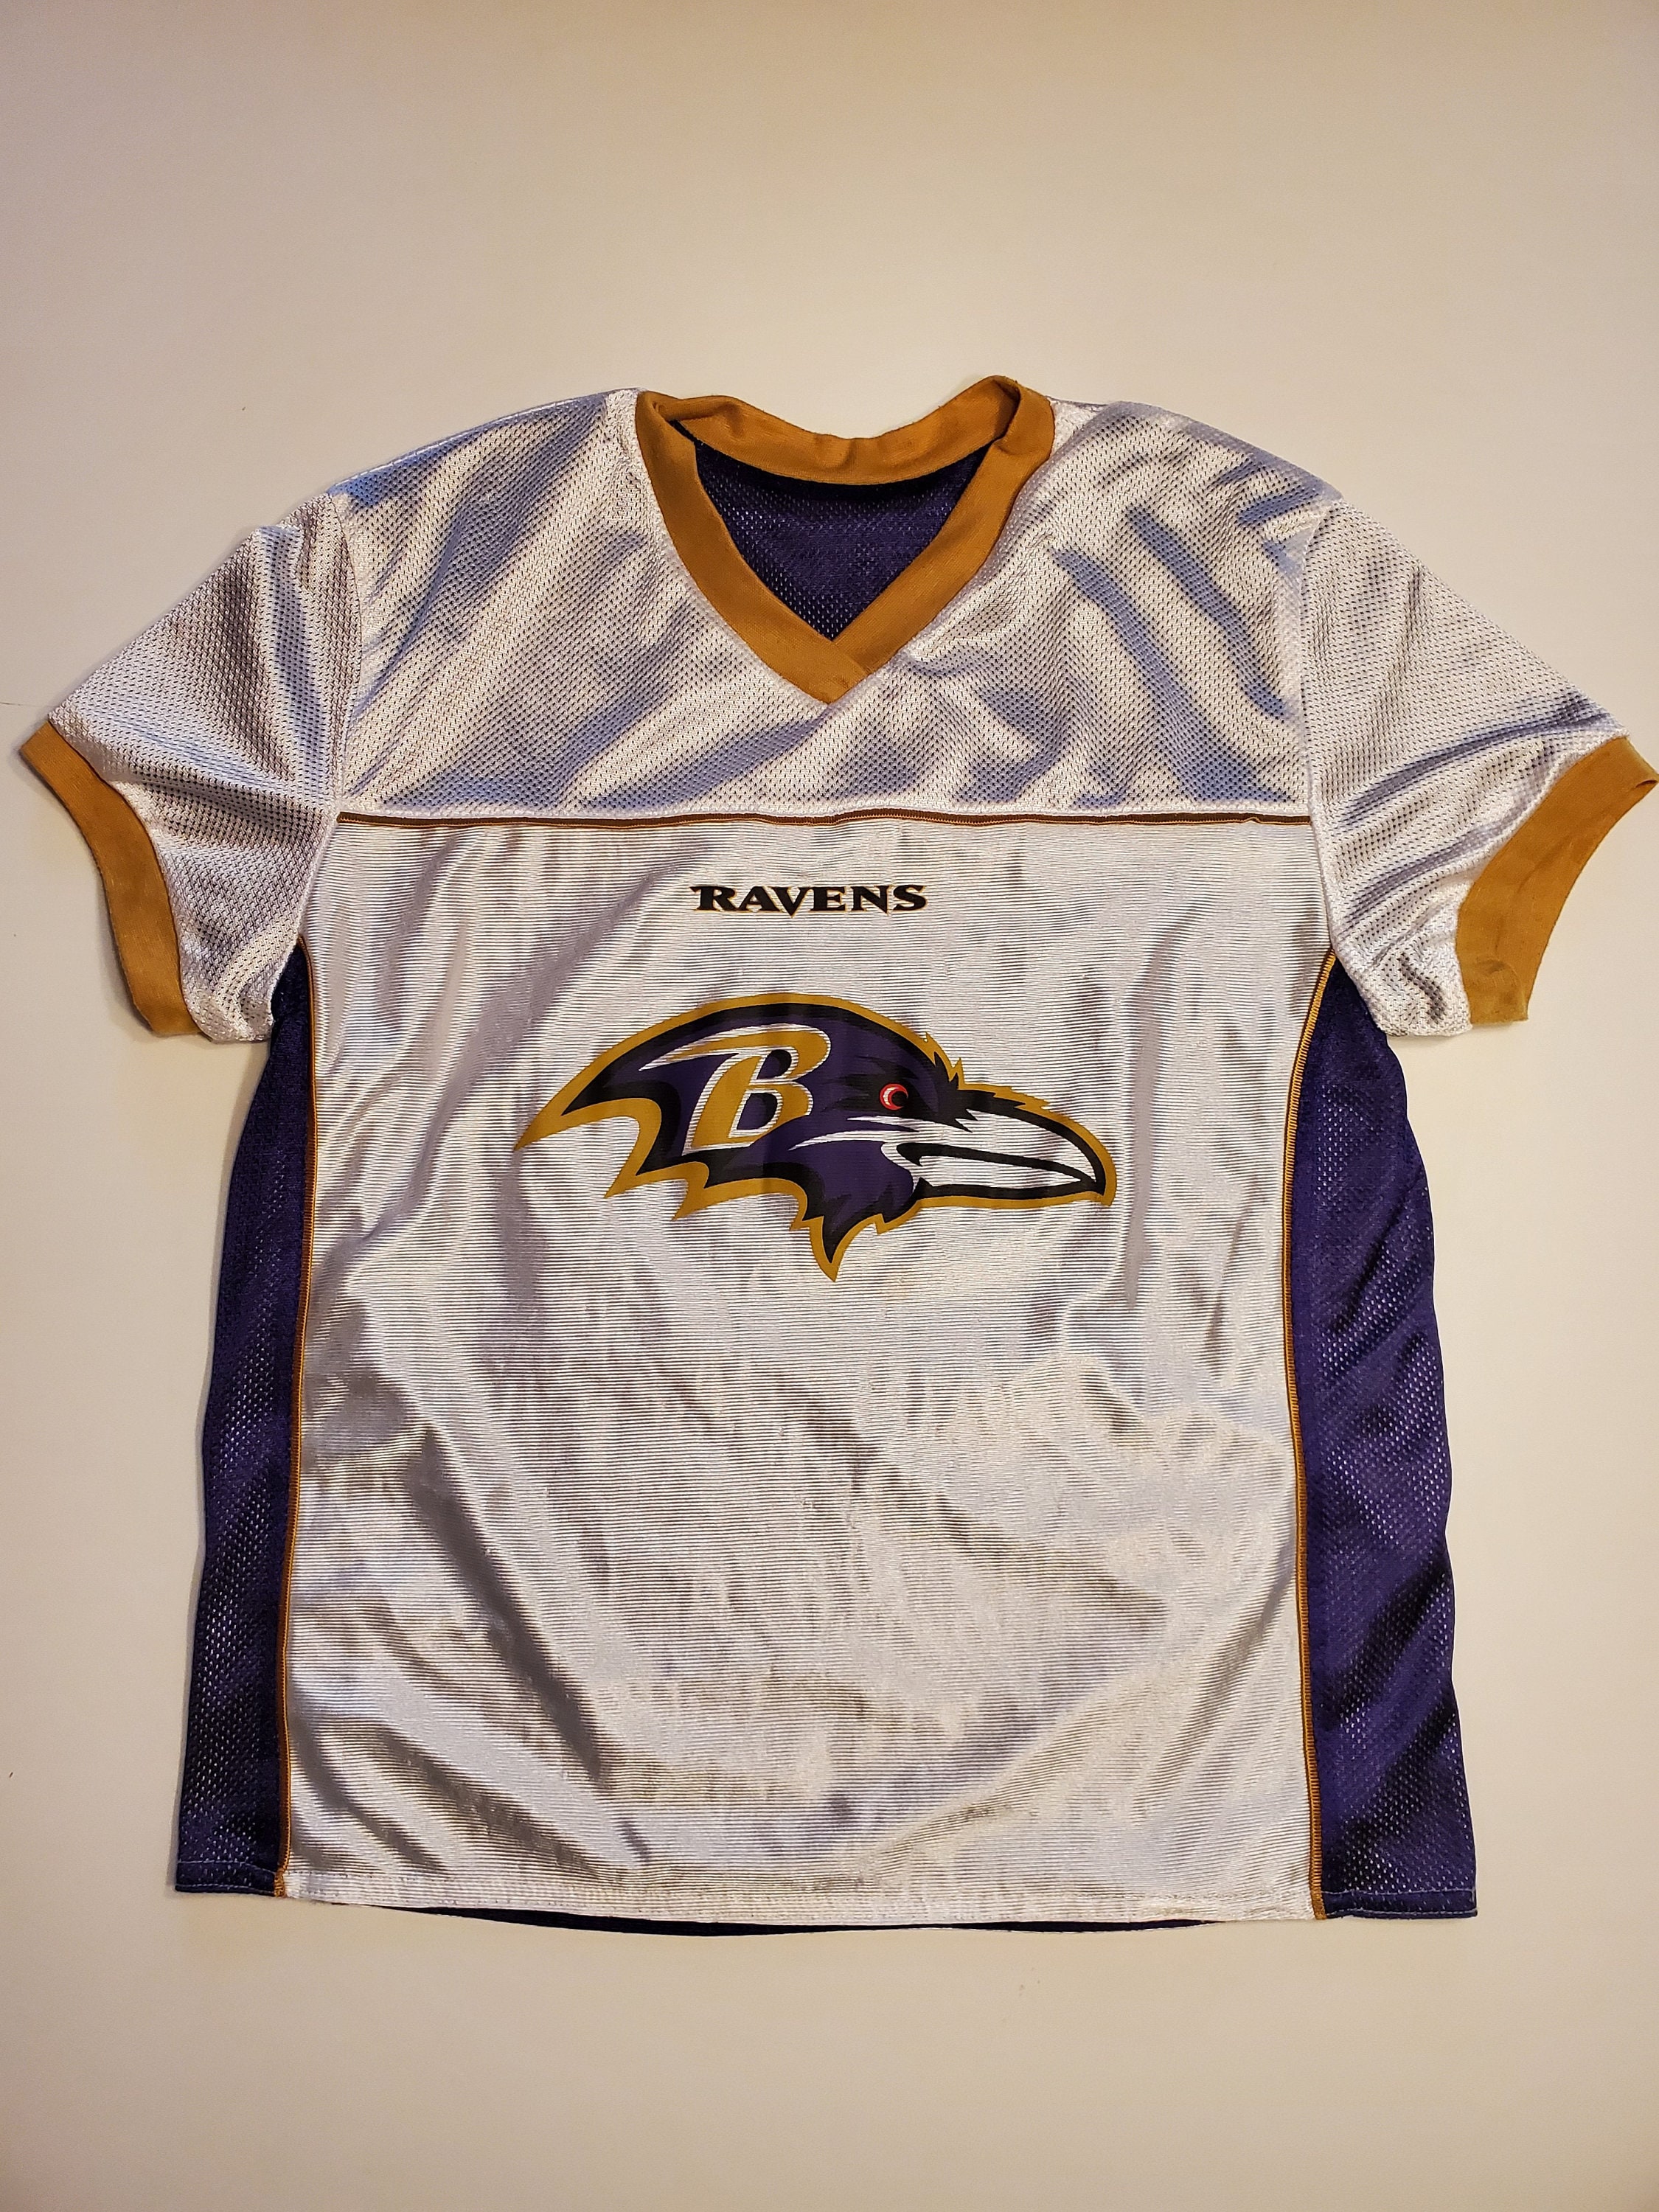 Buy Nfl Ravens Jersey Online In India -  India